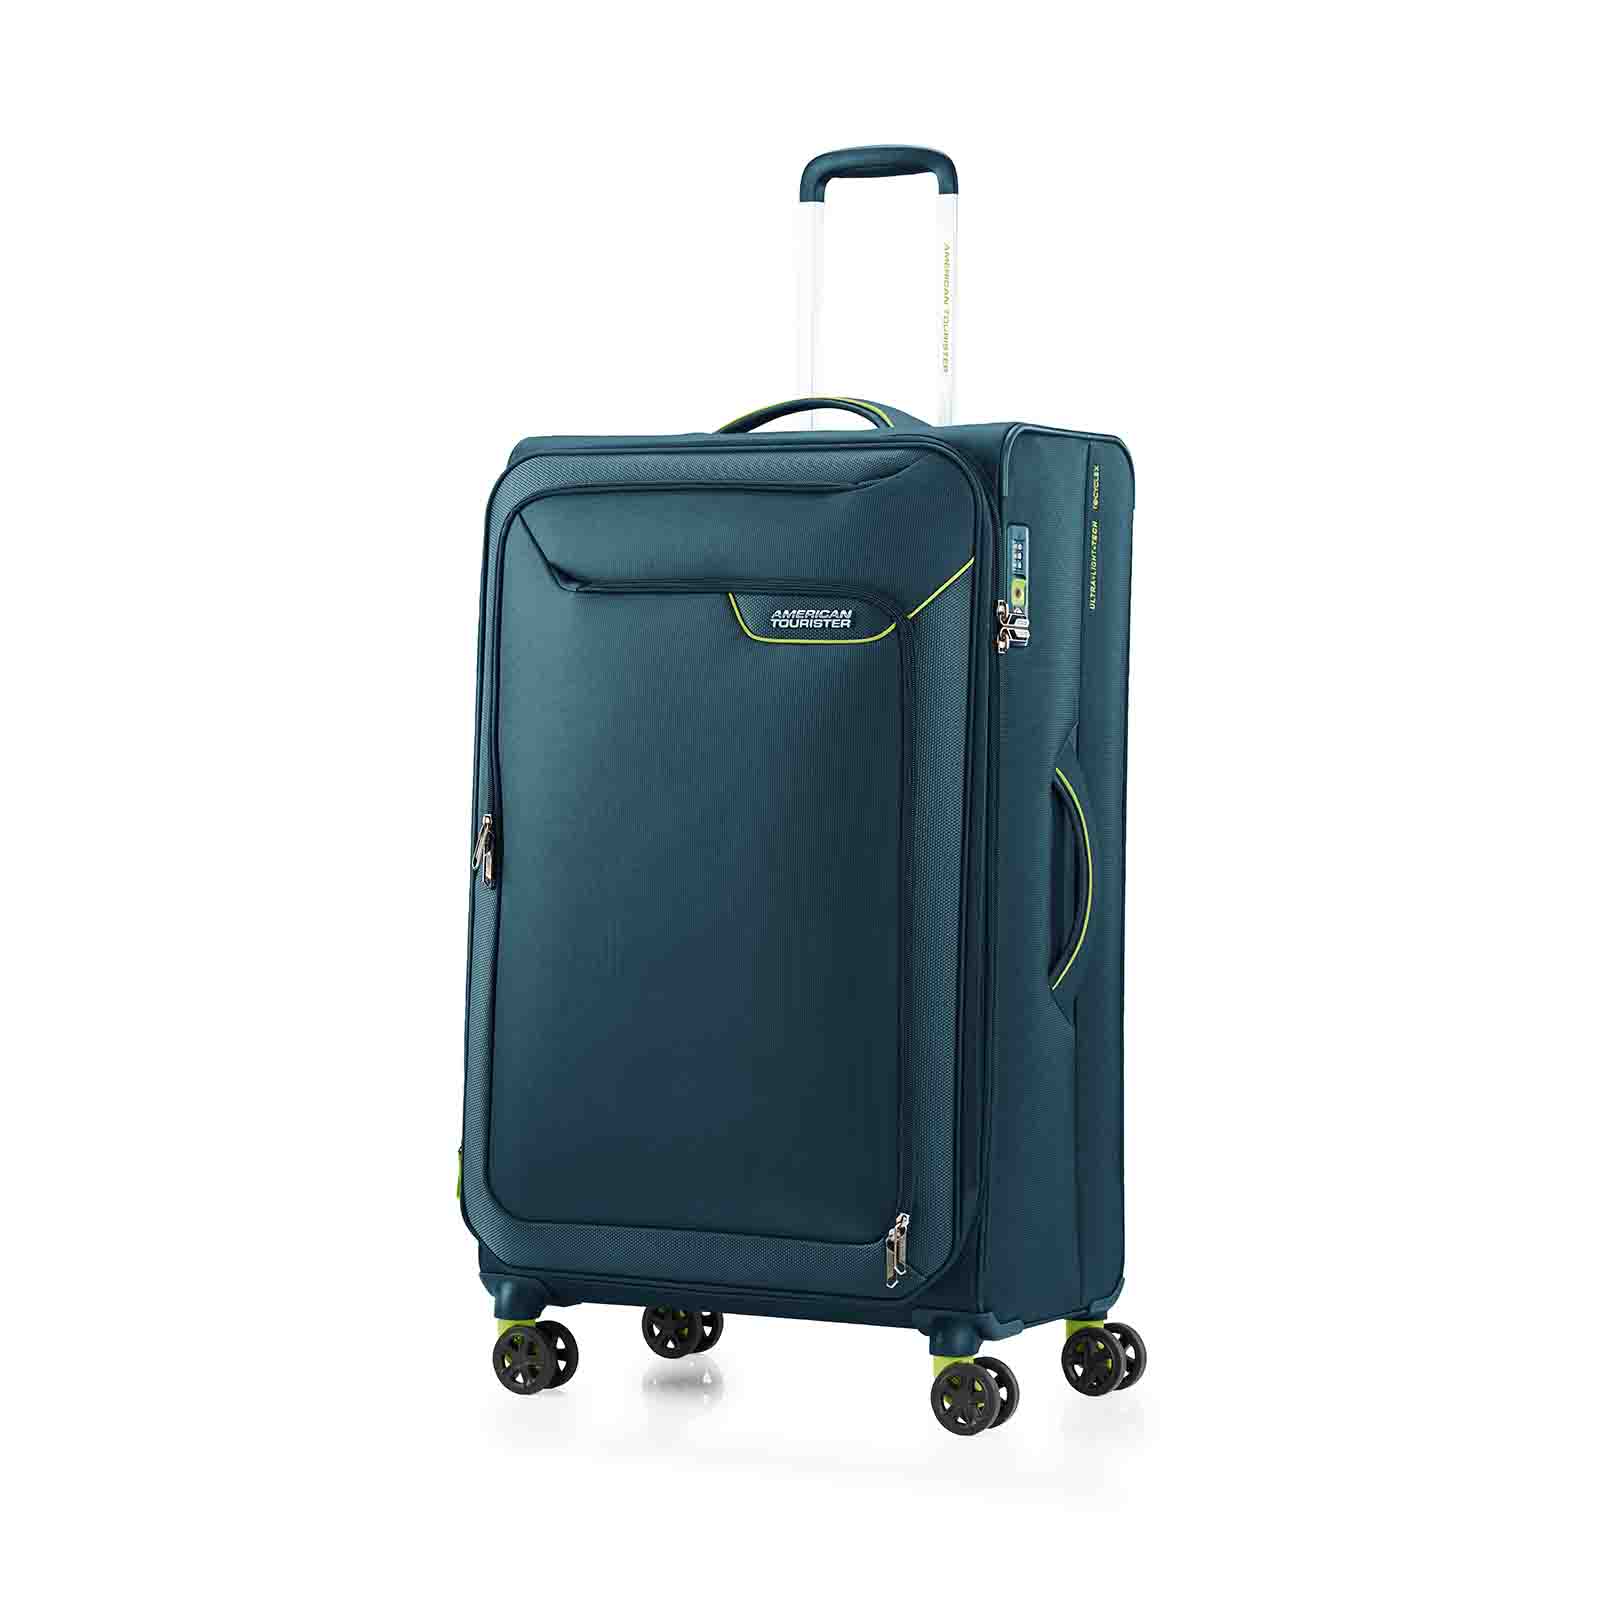 American-Tourister-Applite-4-Eco-82cm-Suitcase-Varsity-Green-Angle